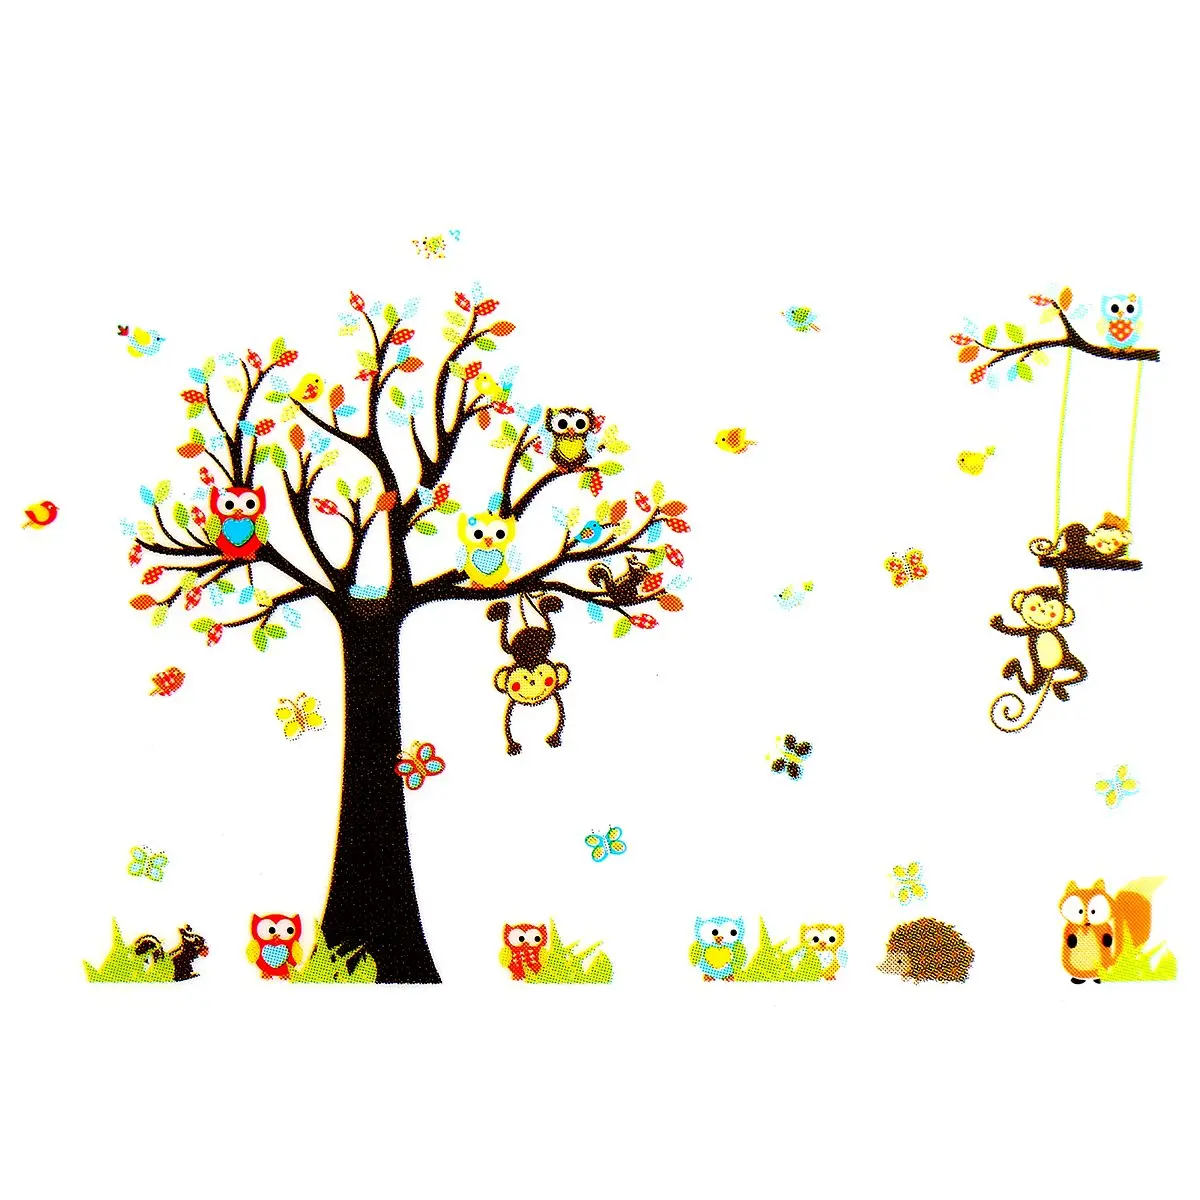 wall stickers pvc removable cute owl monkey wallpaper art wall decals animal tree picture diy dance studio home decor in wall stickers from home garden on